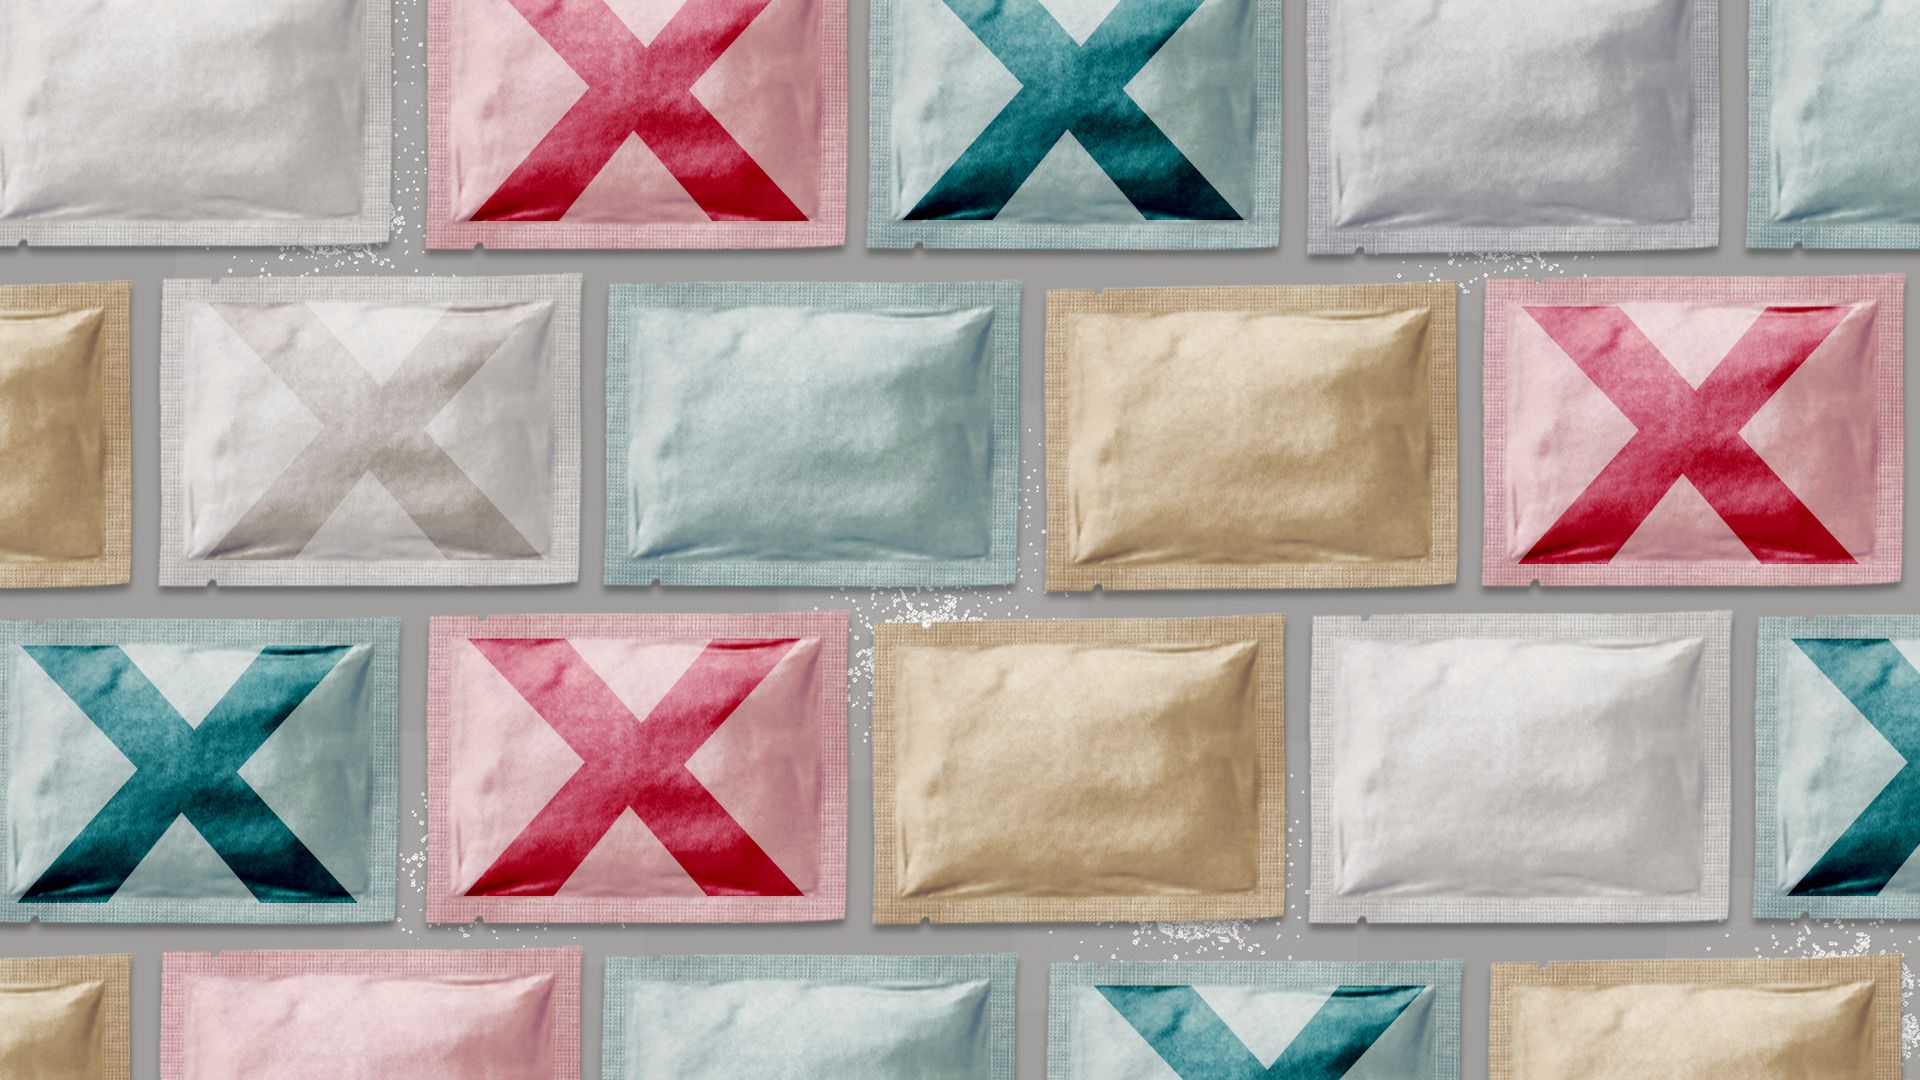 Illustration of many sweetener packets some with exes marked on them